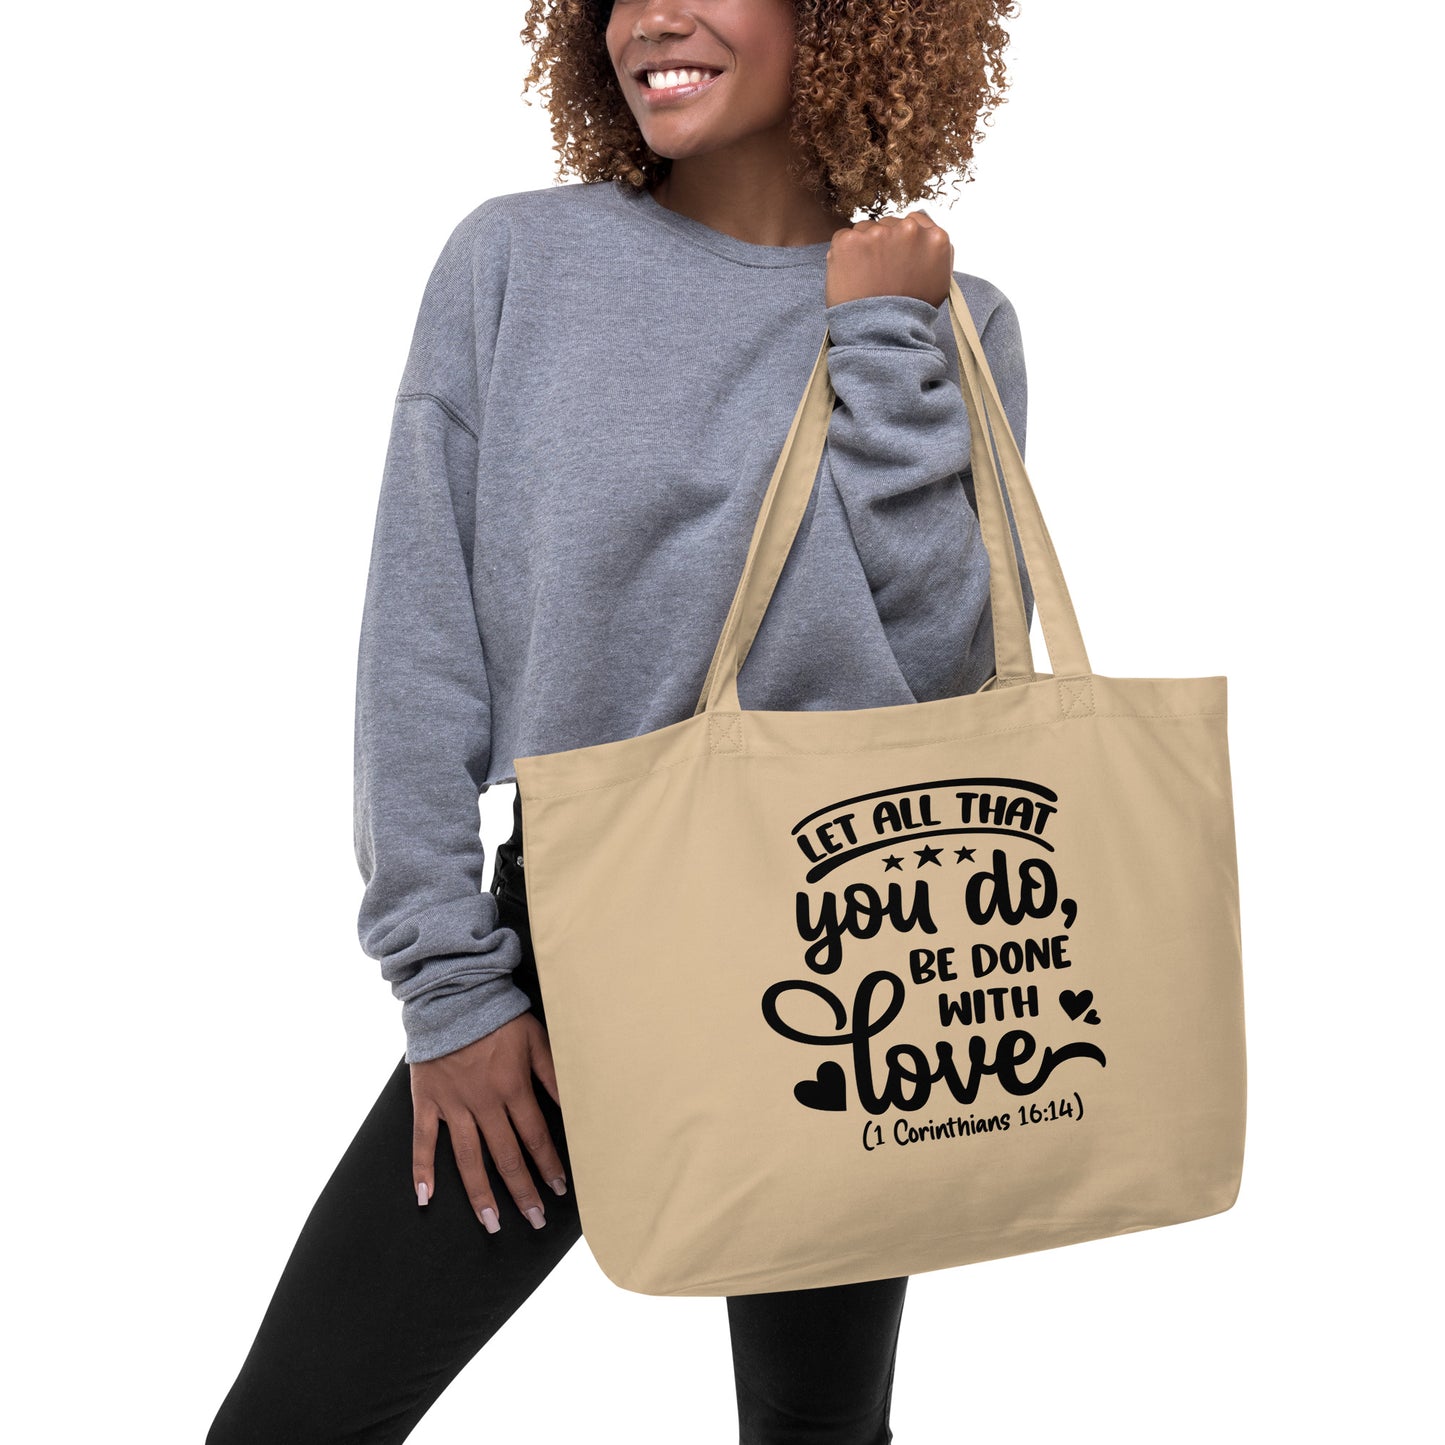 Faith Gift, Let All That You Do Be done in Love Large organic tote bag, Christian Gift